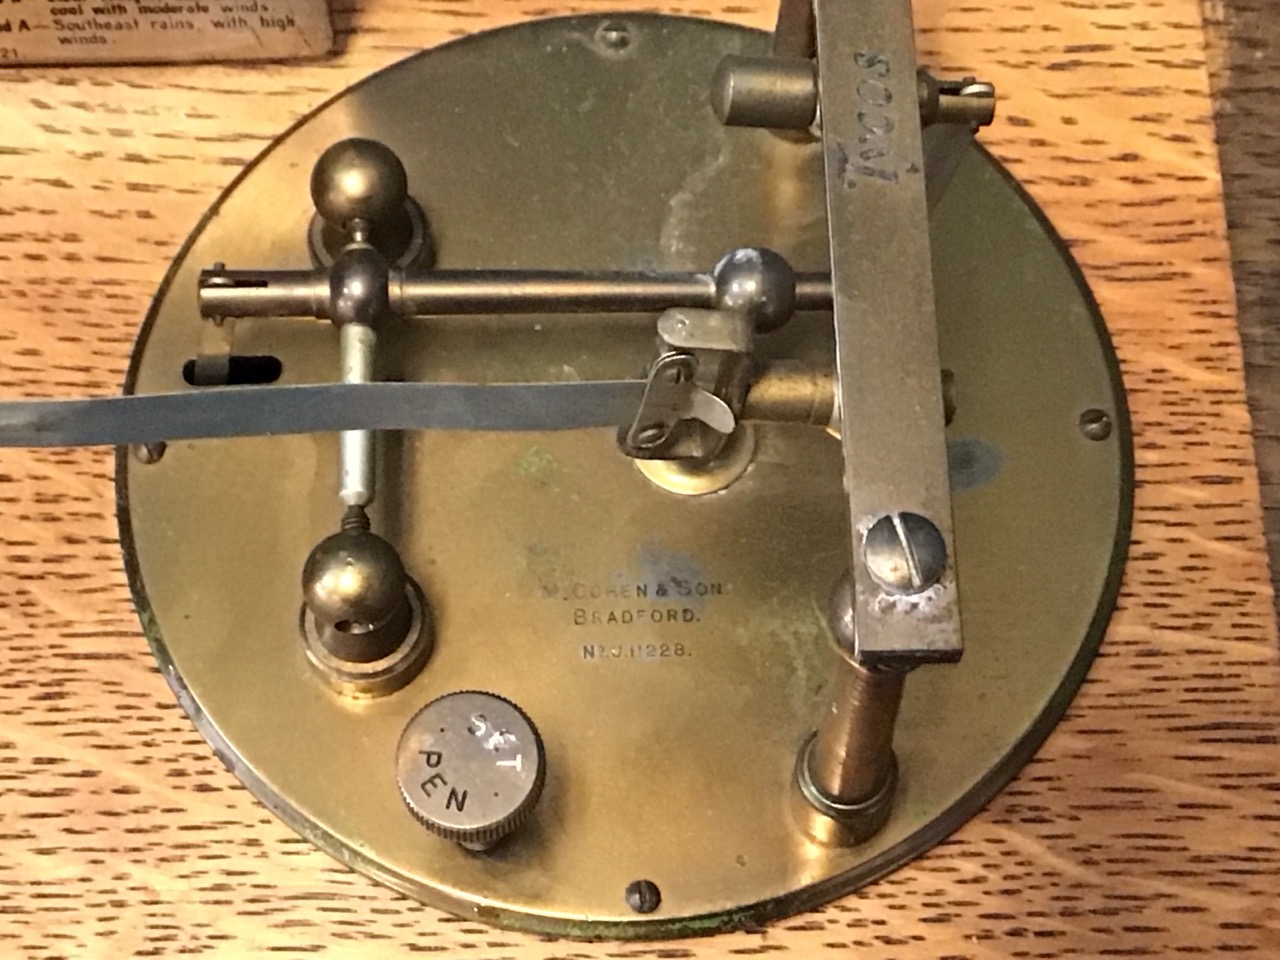 An oak cased brass barograph by M Cohen & Son of Bradford, with rectangular glazed cover on a - Image 3 of 3